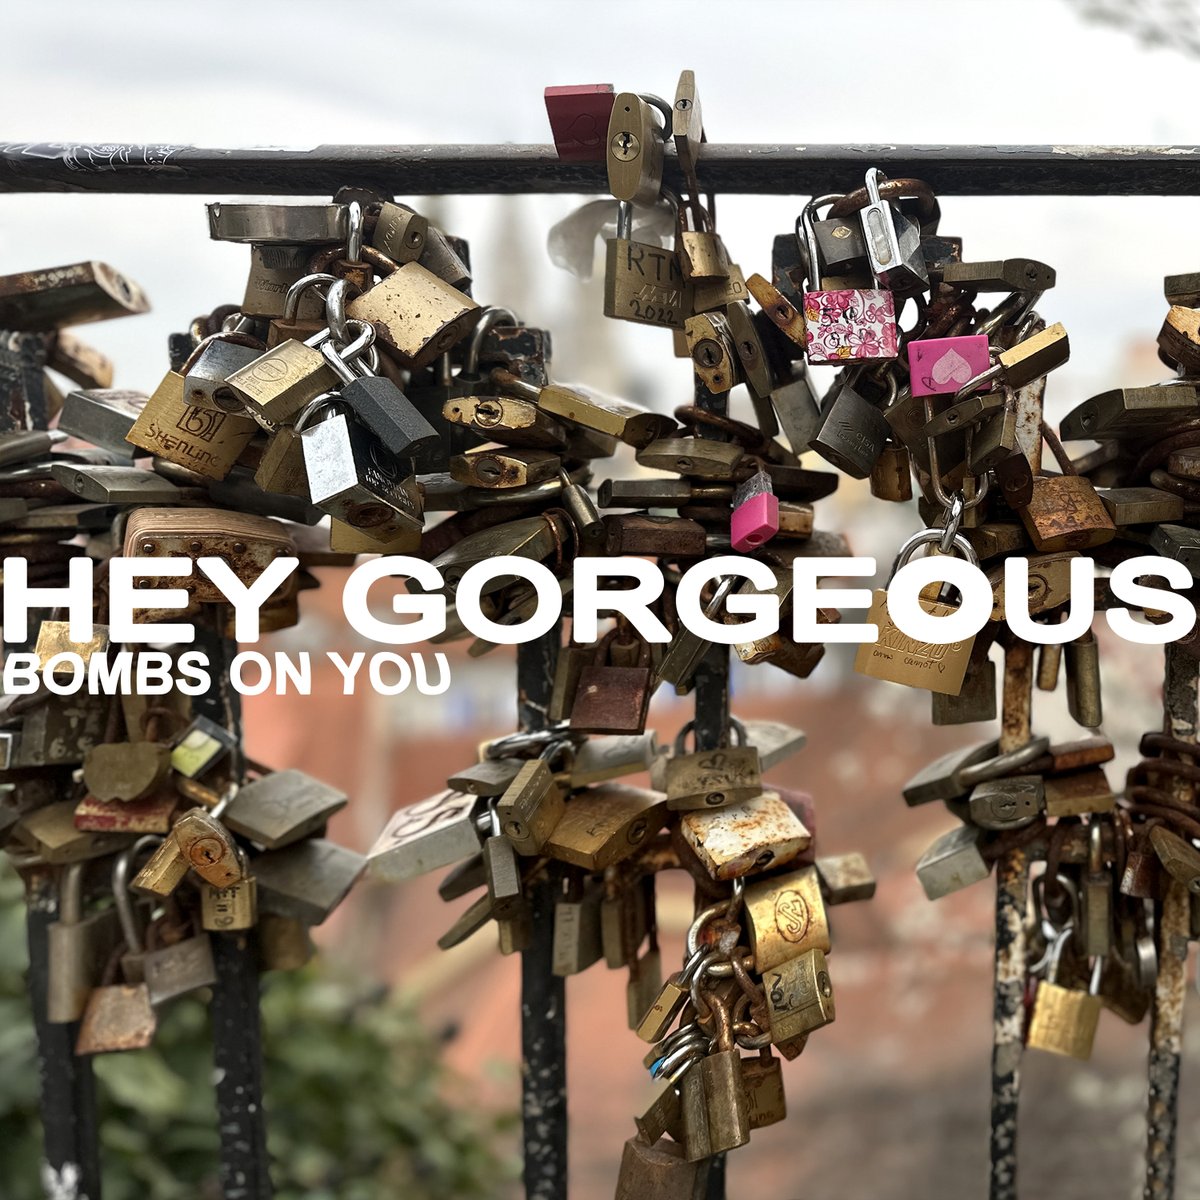 Discover Bombs On You by Hey Gorgeous 
LINK-> youtube.com/watch?v=FeNbhQ… 
via @HeyGroover #GrooverEffect